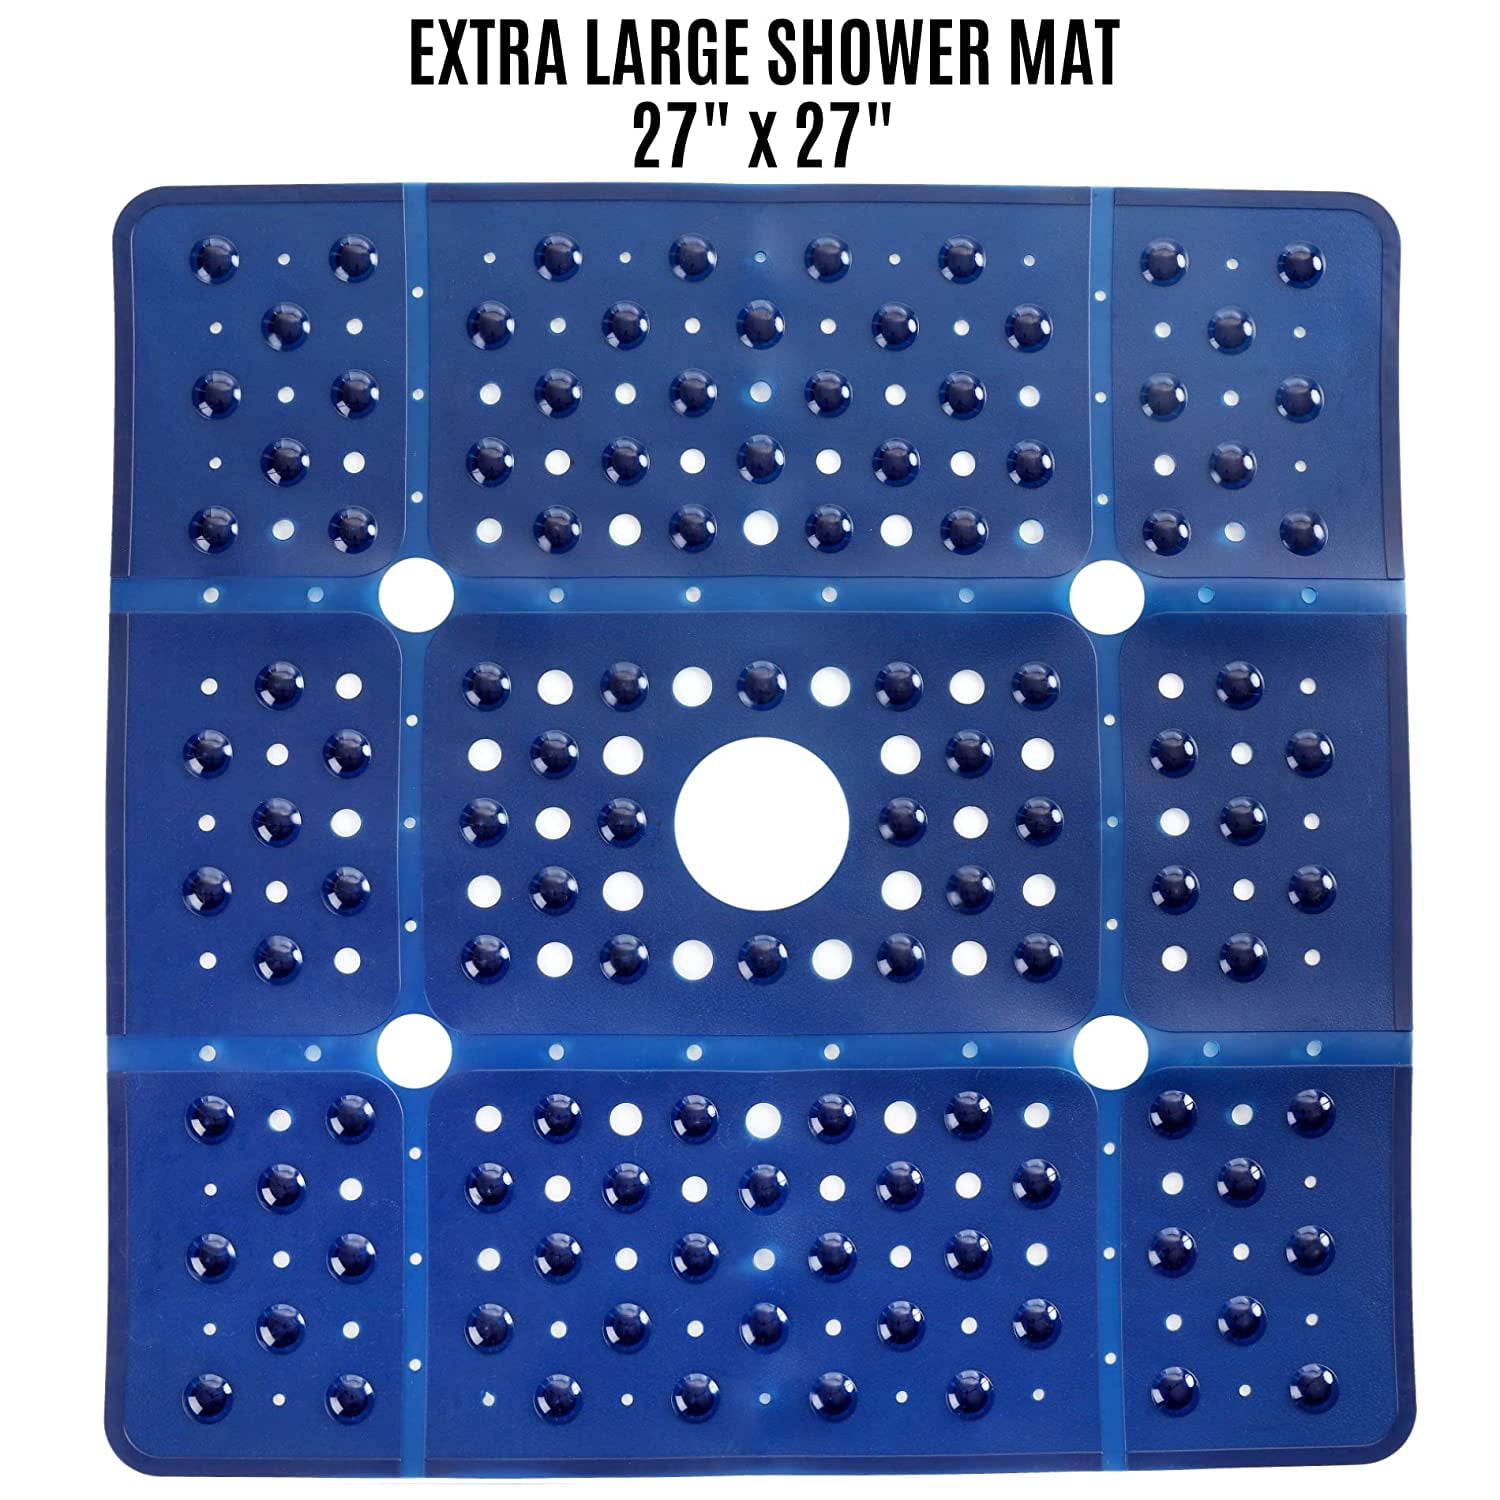 65% MORE COVERAGE 27" SlipX Solutions Red Extra Large Shower Mat 